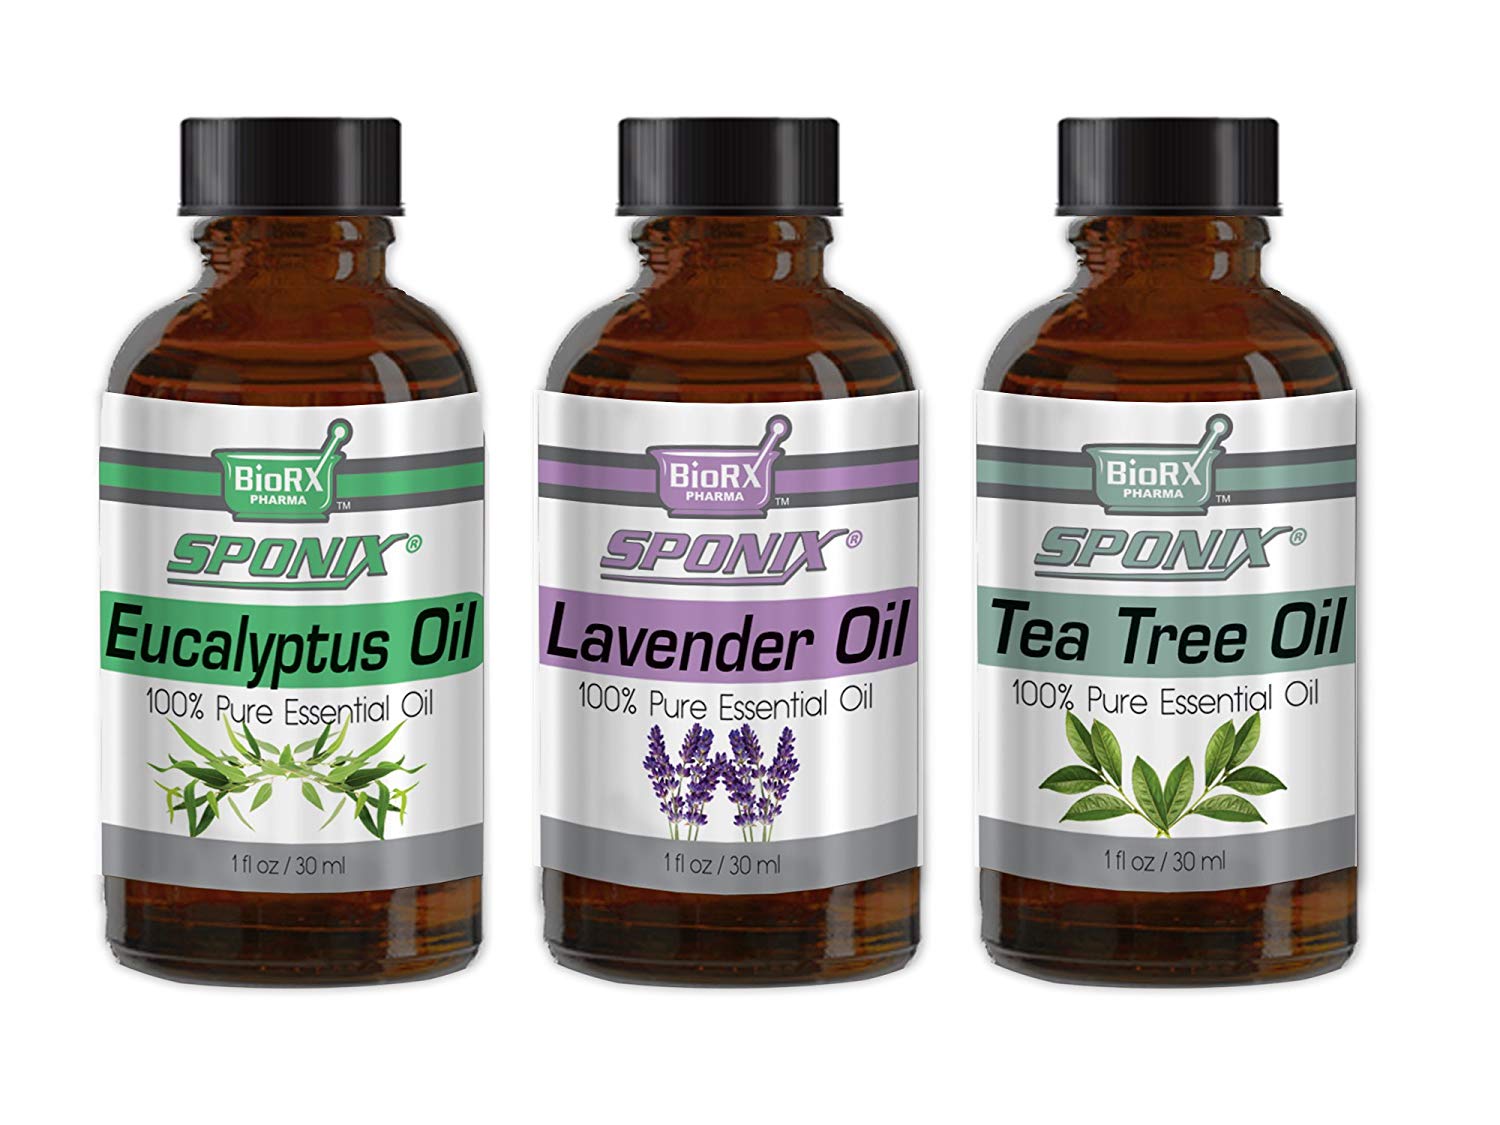 Lavender Essential Oil Set with Roll-on and Dropper - 100% Pure